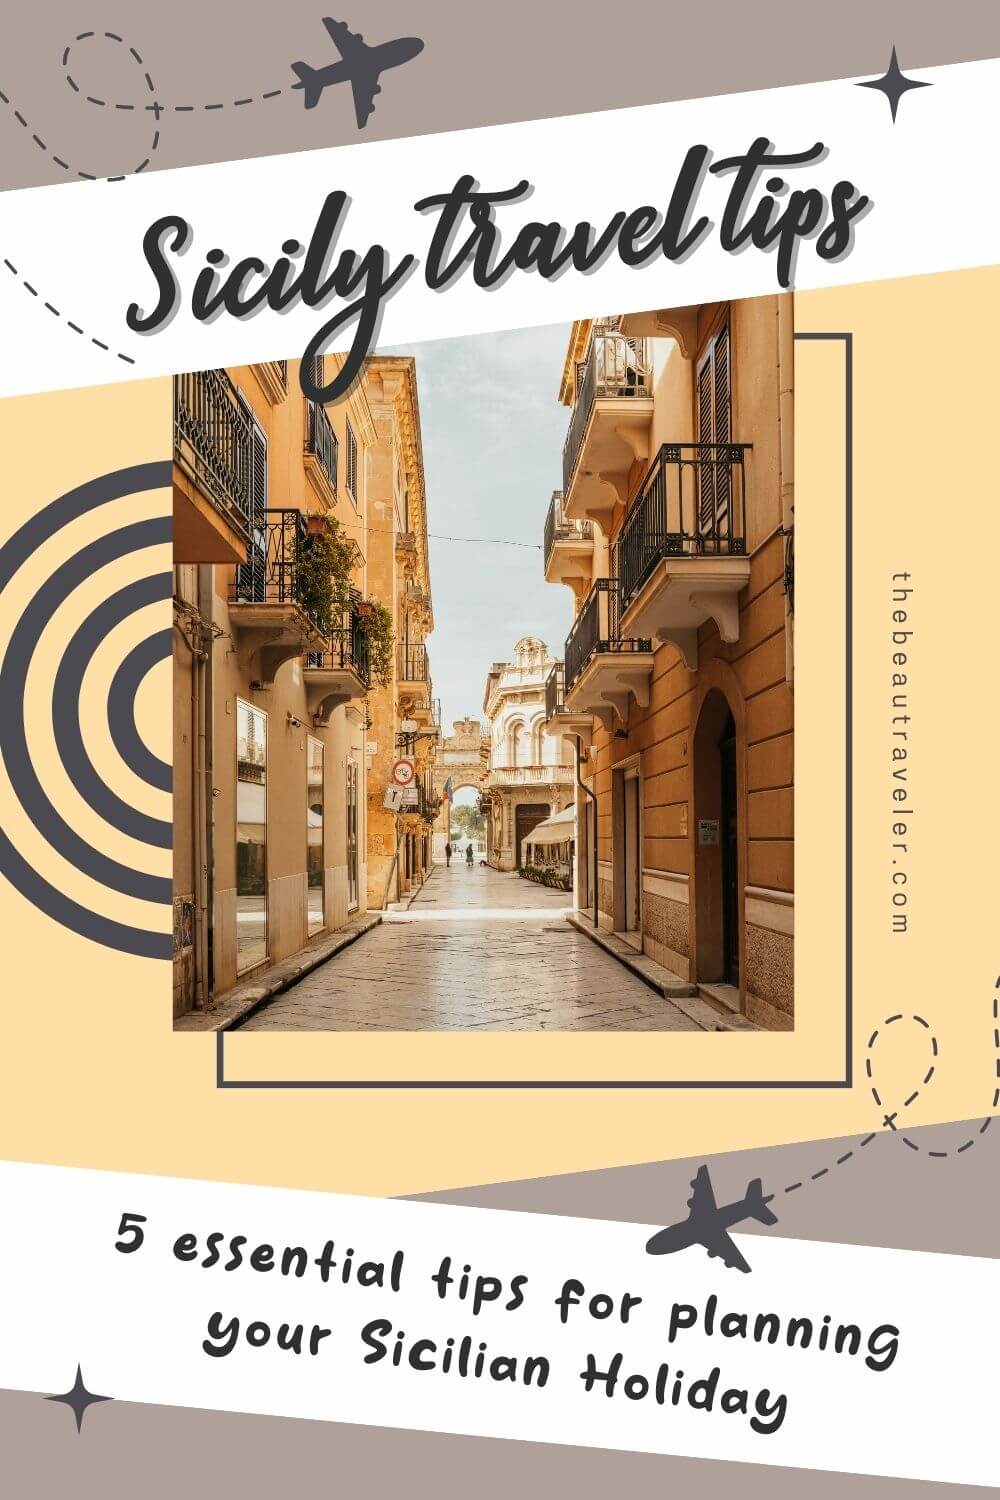 Discover the Charm of Sicily: A Complete Guide for Your Perfect Holiday - The BeauTraveler